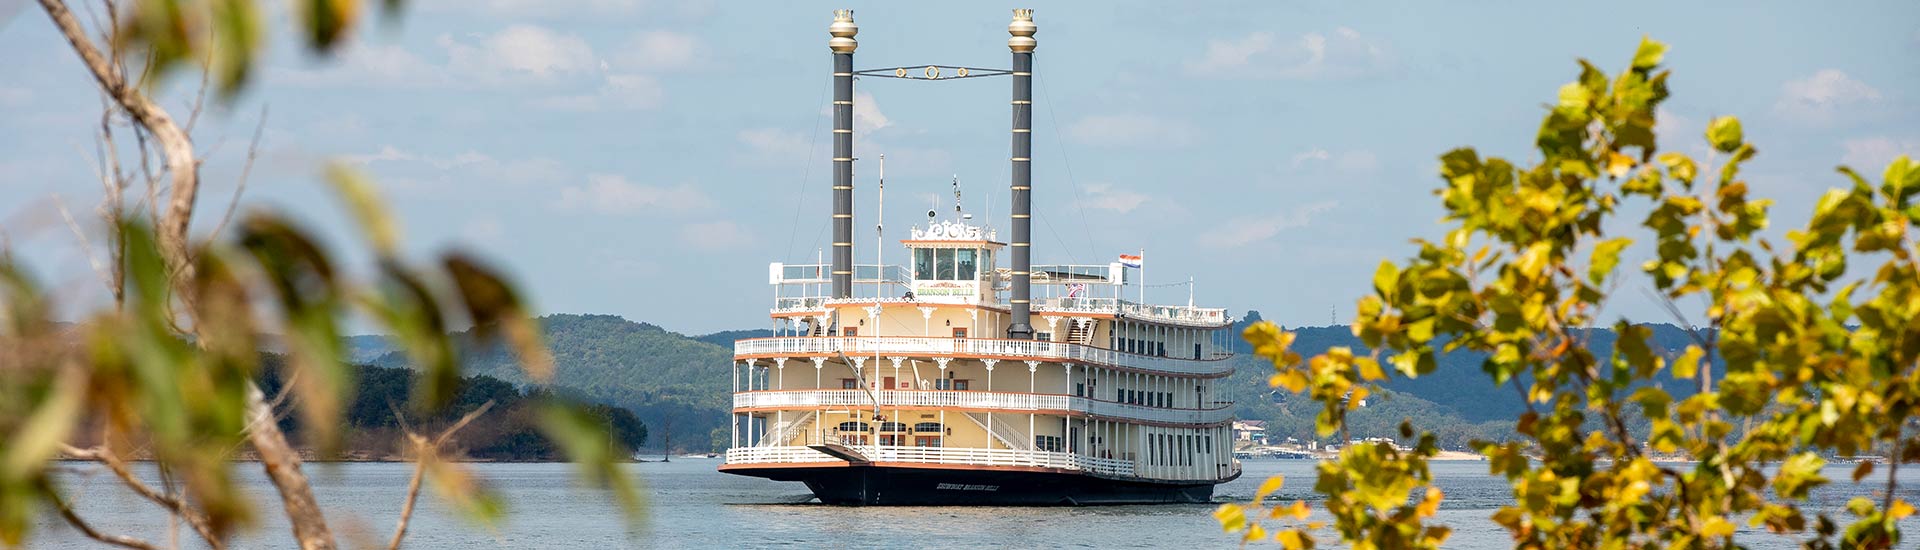 Panorama of Branson Belle Showboat on Table Rock Lake framed by trees in foreground, Branson, MO.